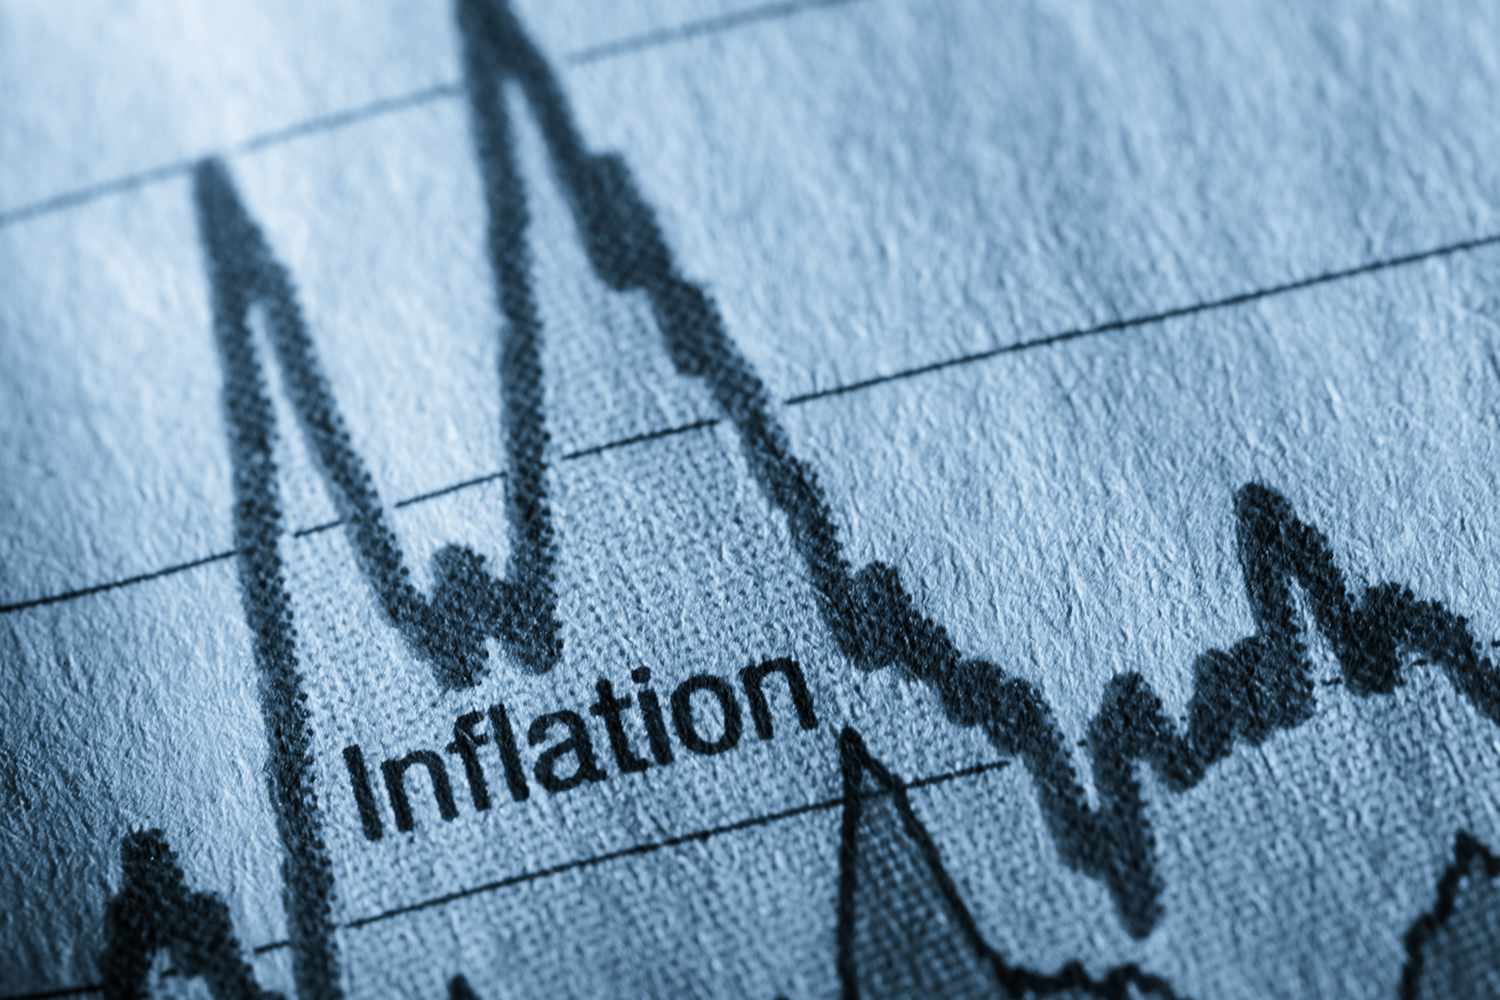 What Are The Three Possible Effects Of Inflation?